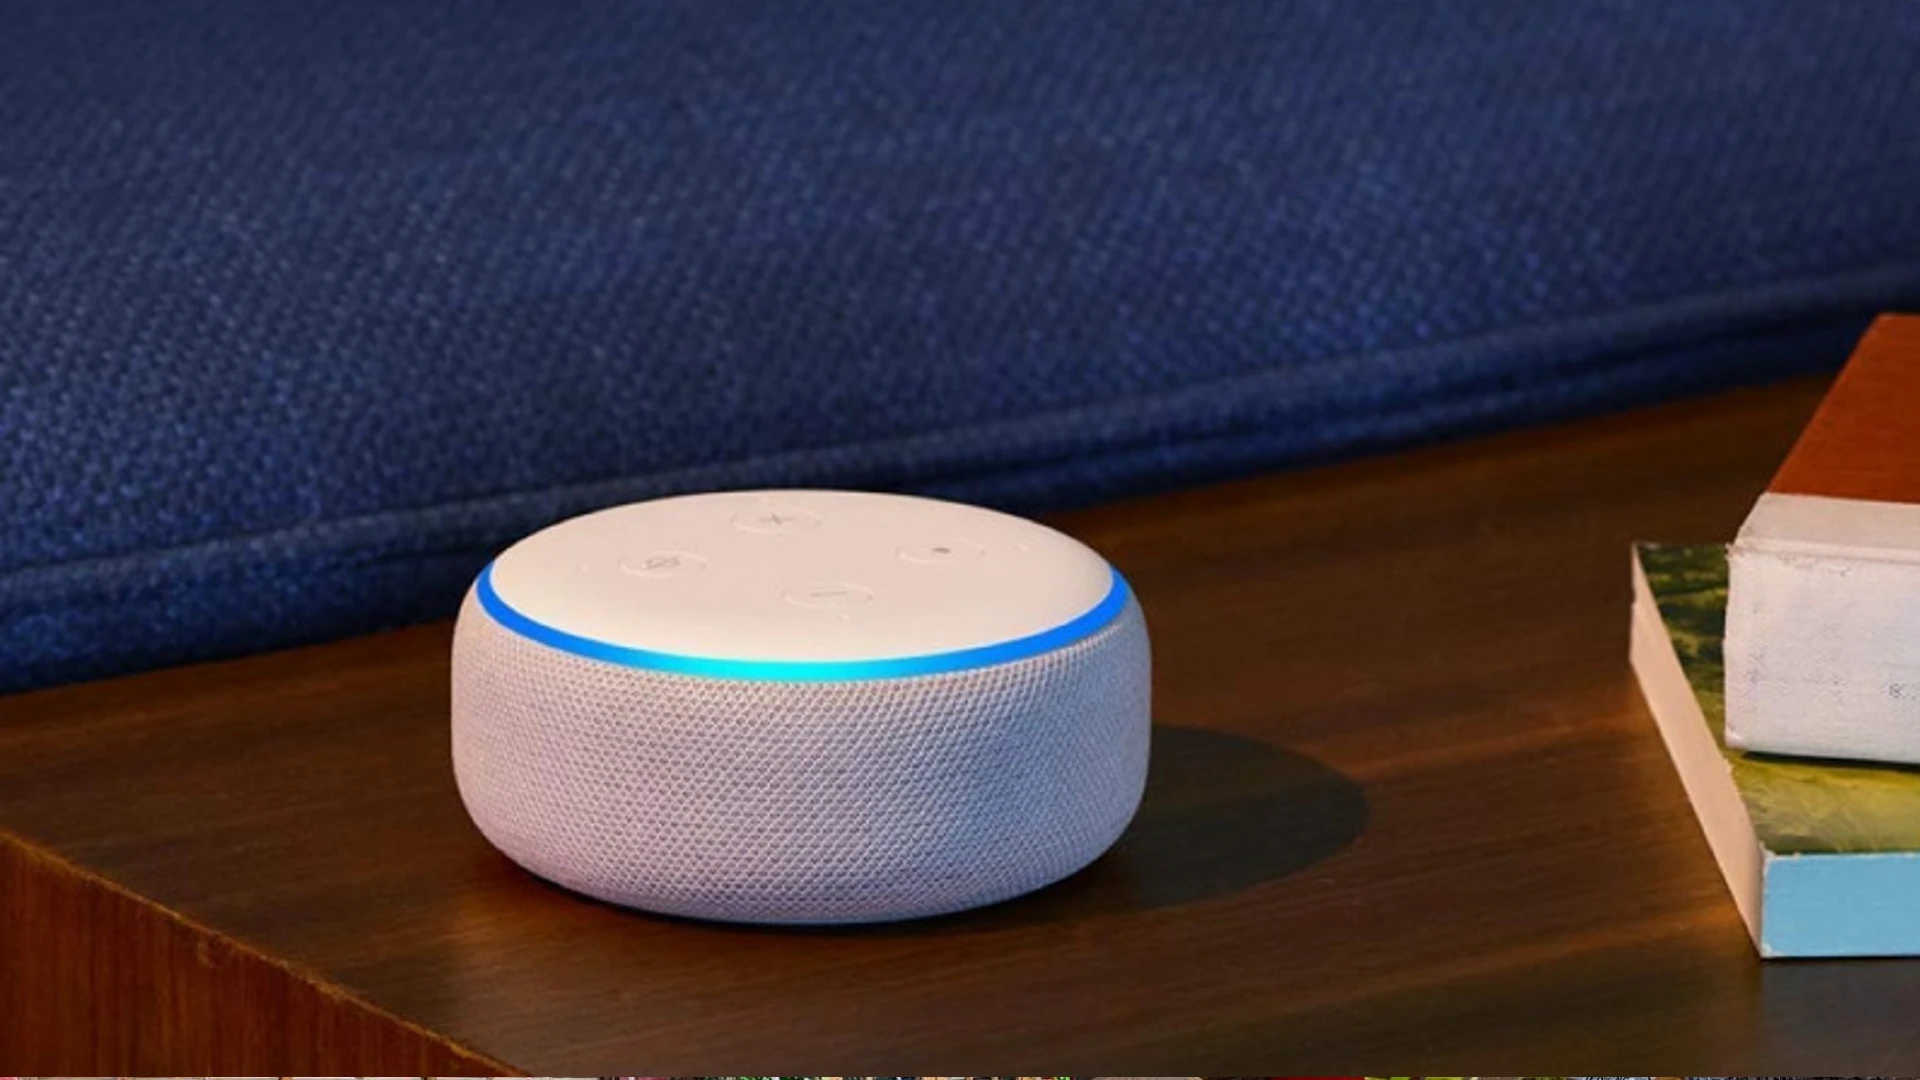 How to use Bluetooth to connect Amazon Echo to phones or speakers